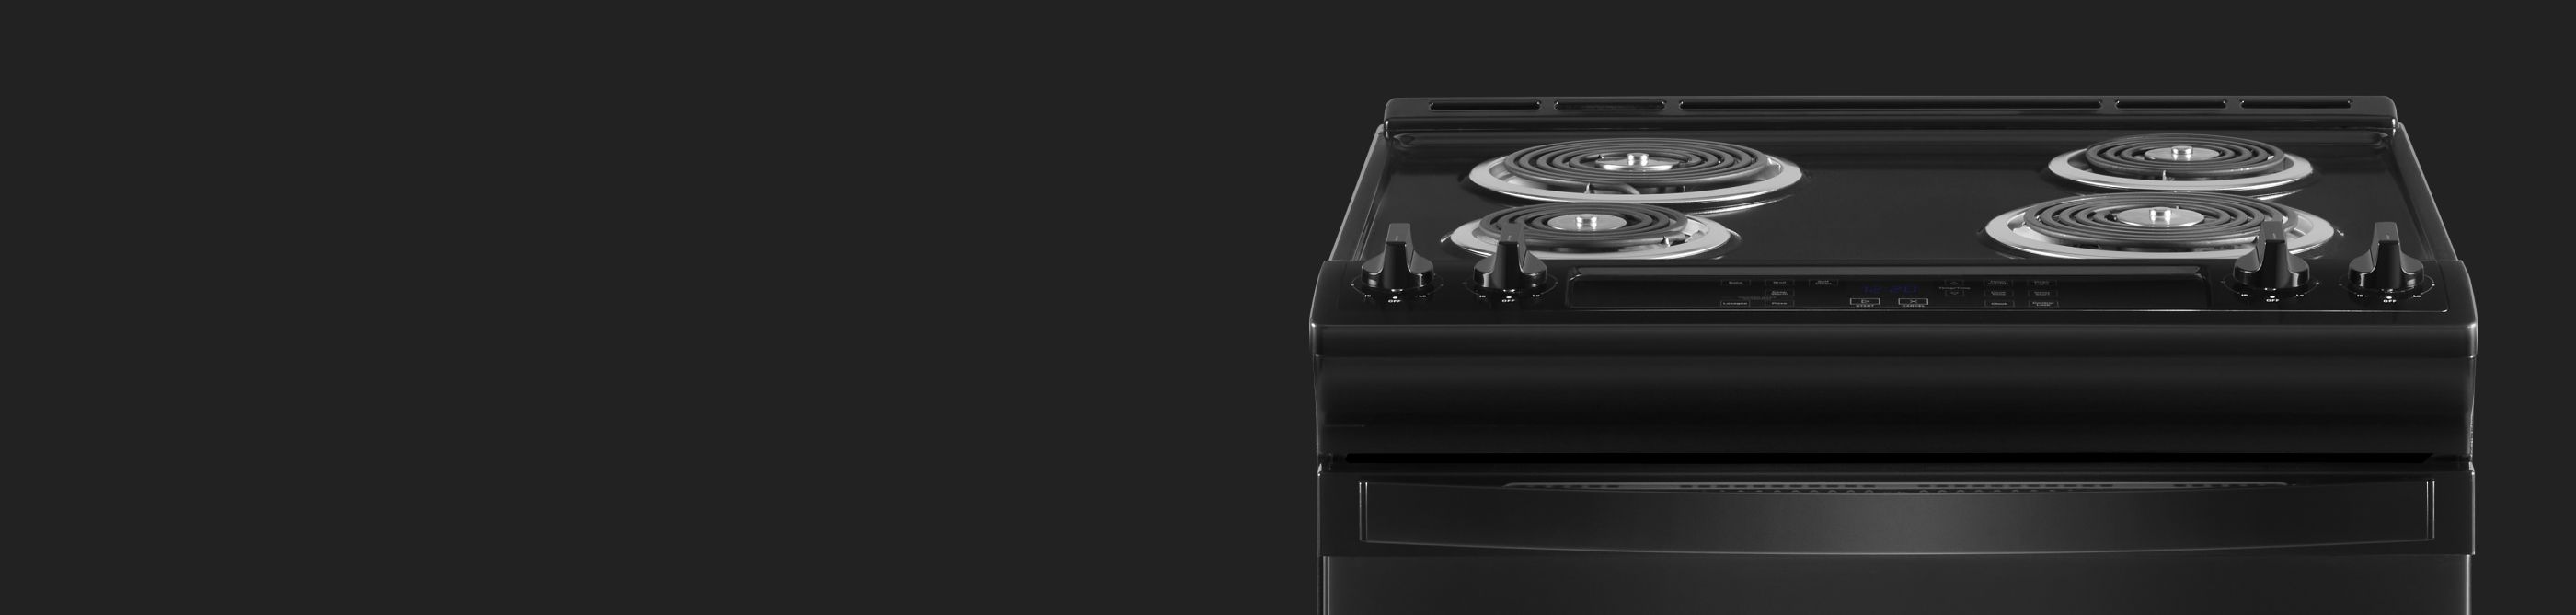 A closeup of a Whirlpool® electric oven cooktop with coil burners.